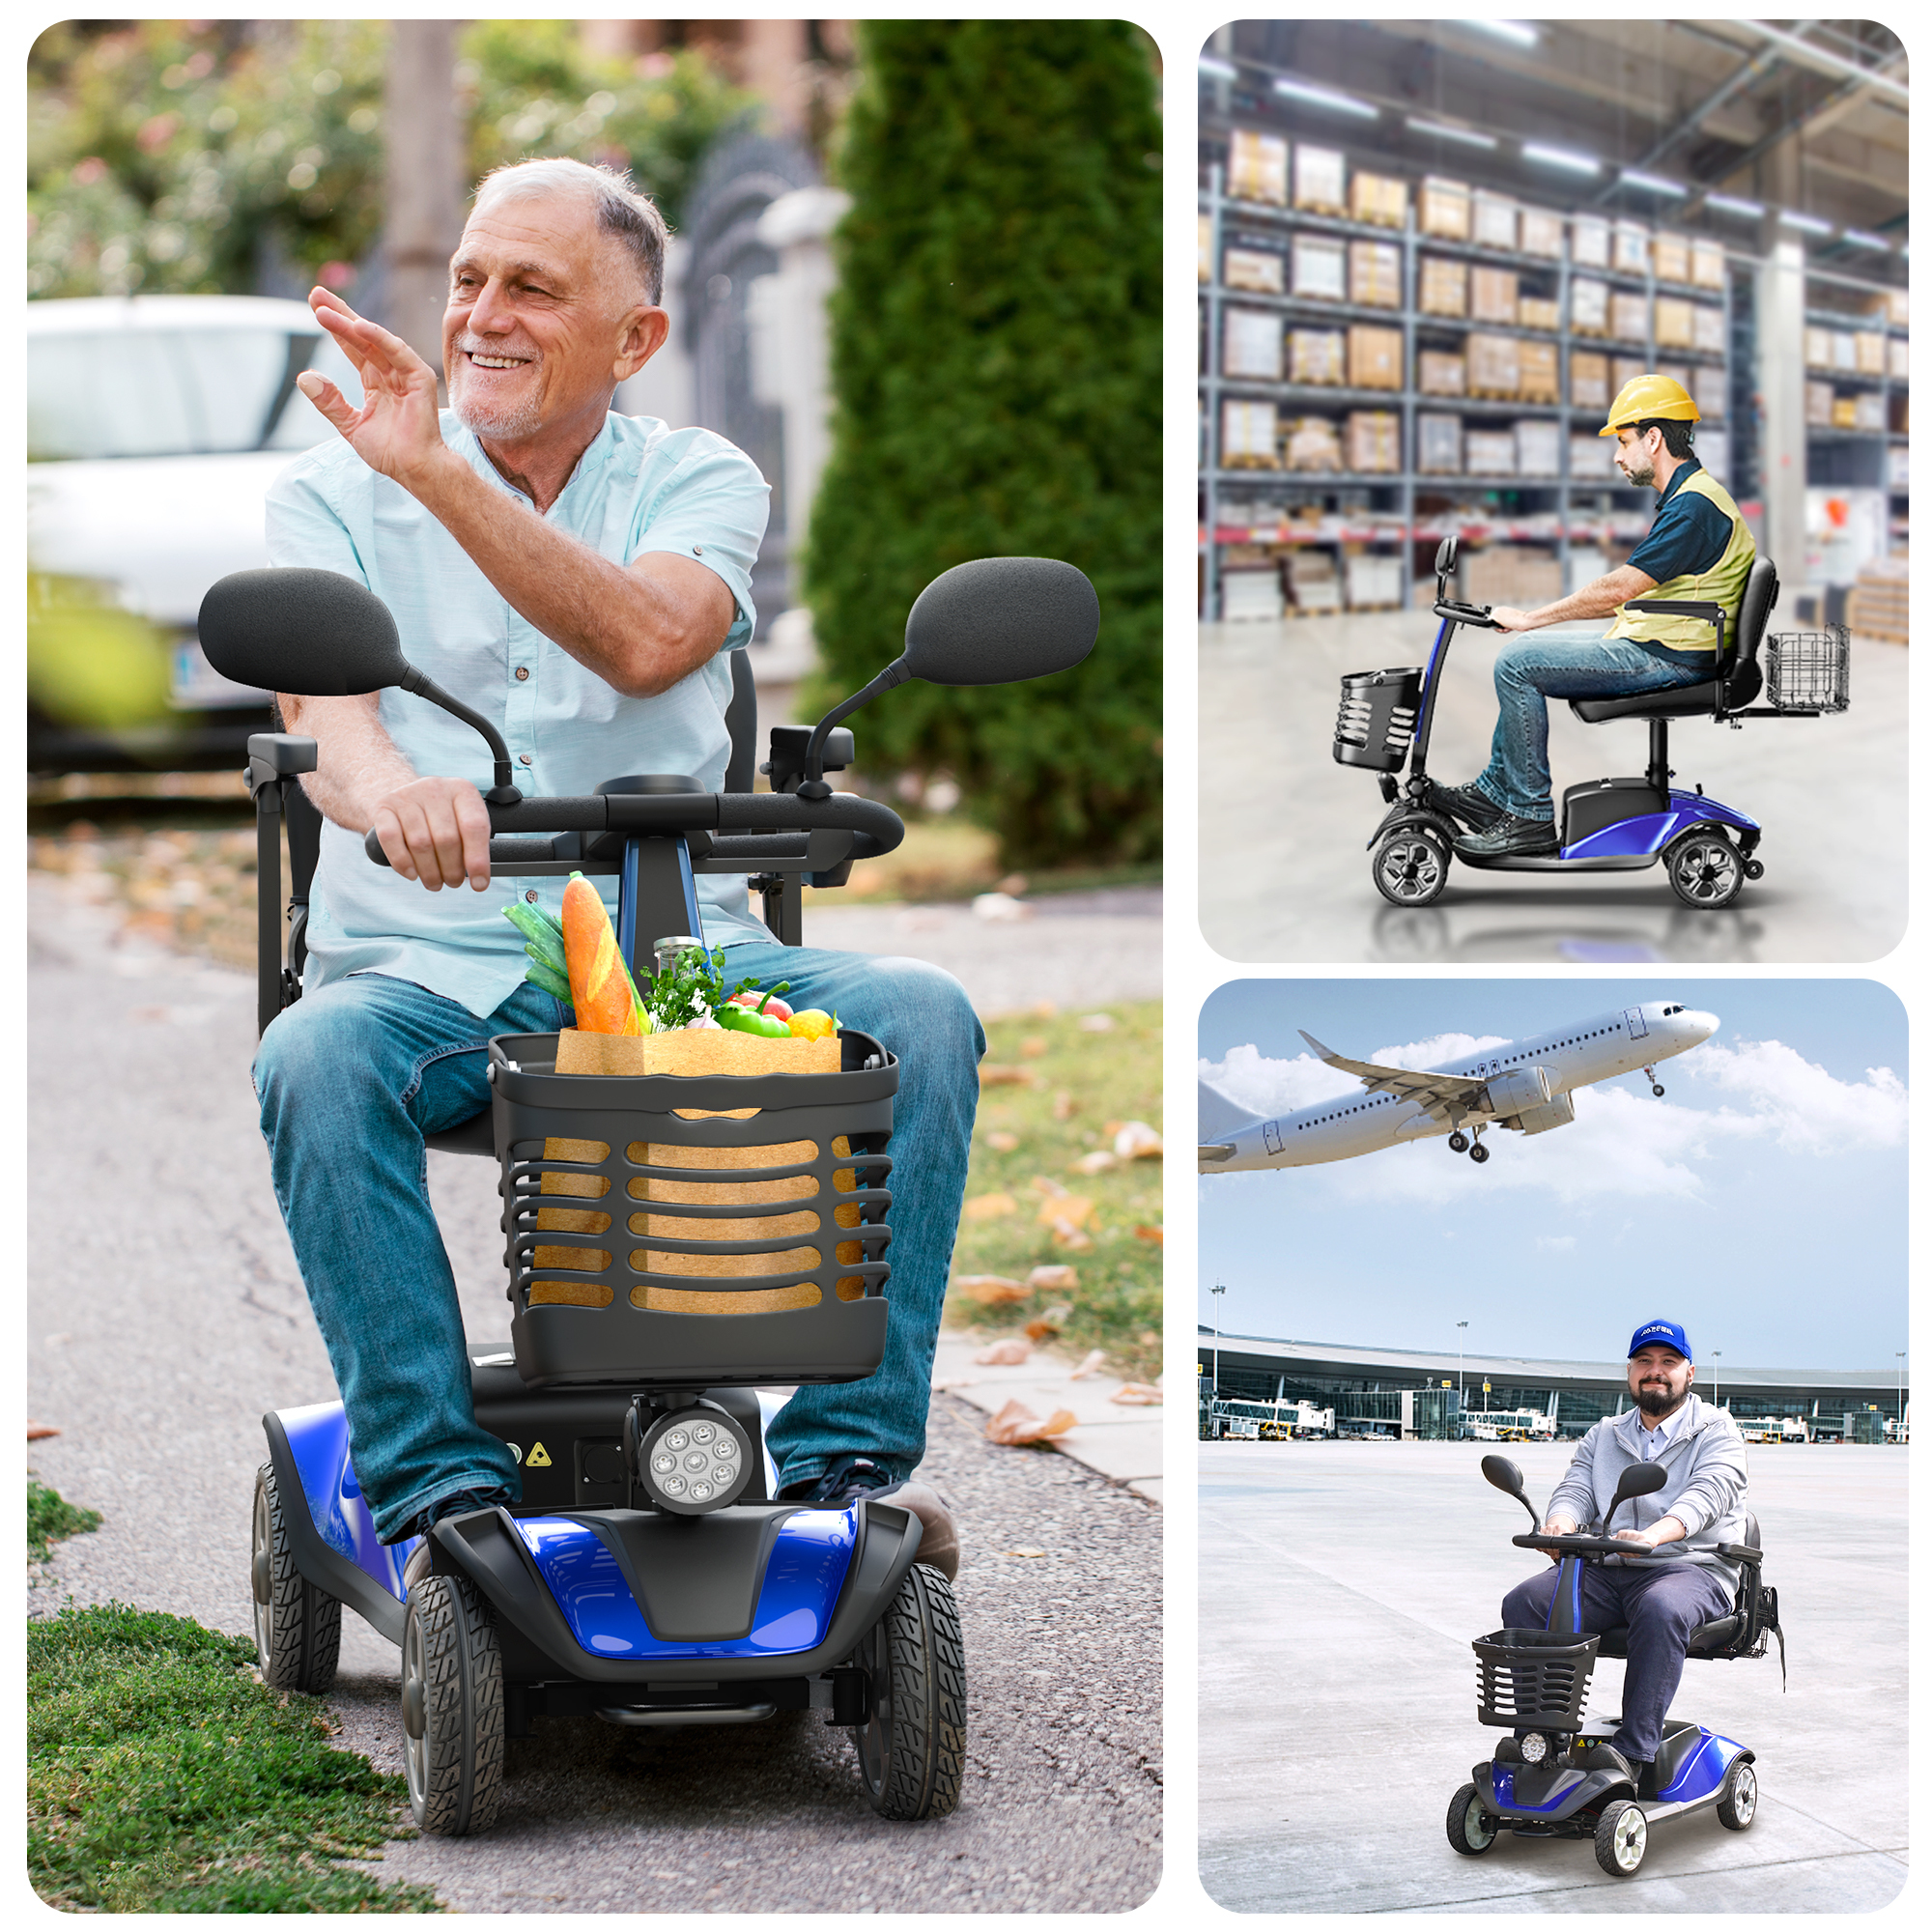 SACVON Upgrade 4 Wheel Mobility Scooter for Seniors, Foldable Powered Mobile Wheelchair for Adult 330lbs, Blue - image 3 of 10